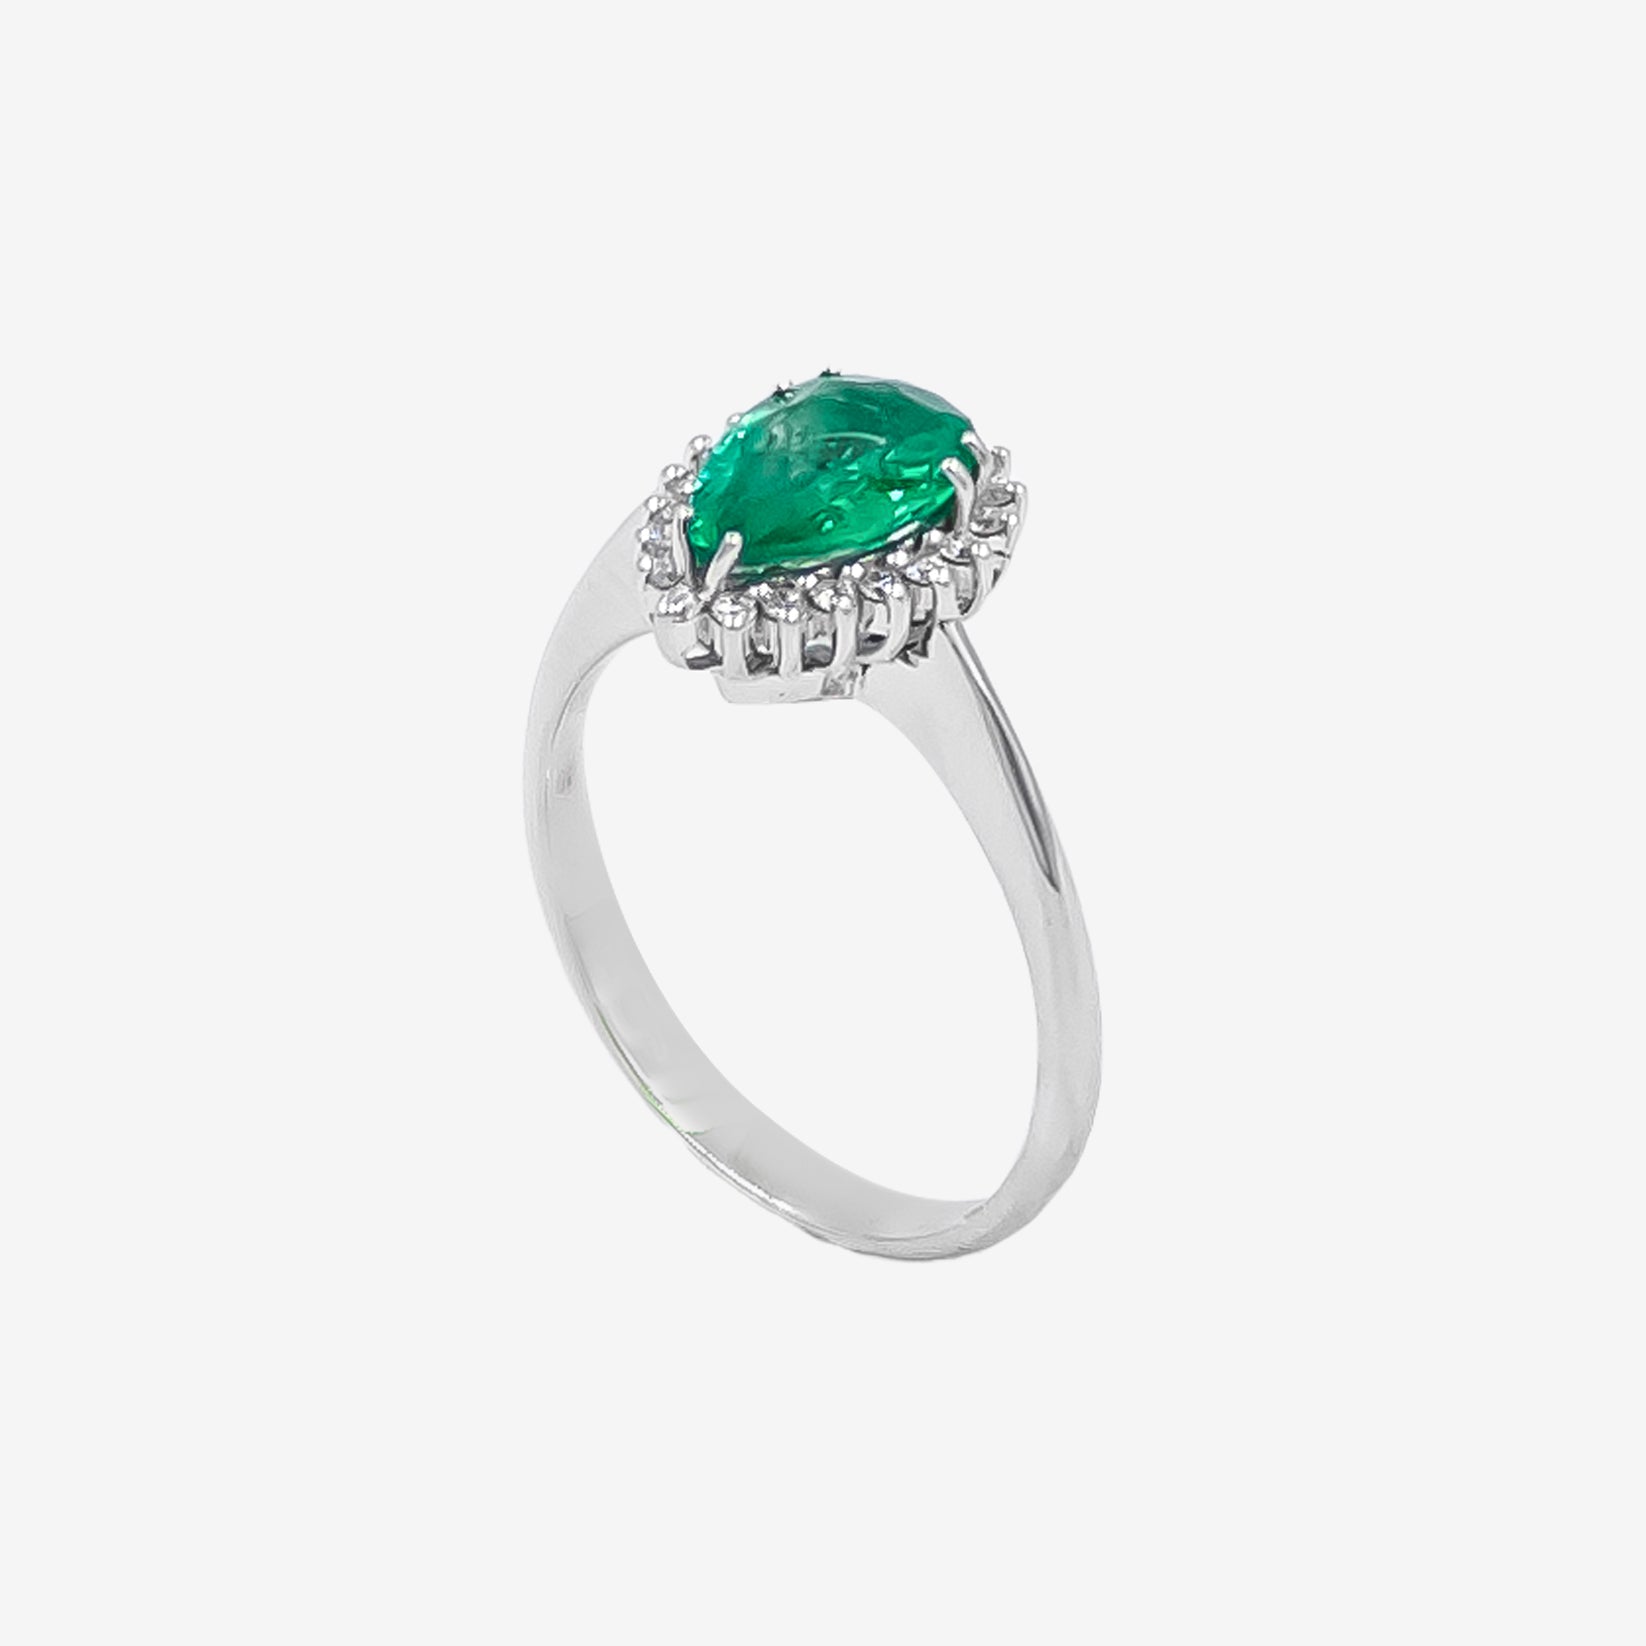 Emerald Tear Droplet Ring with Diamonds